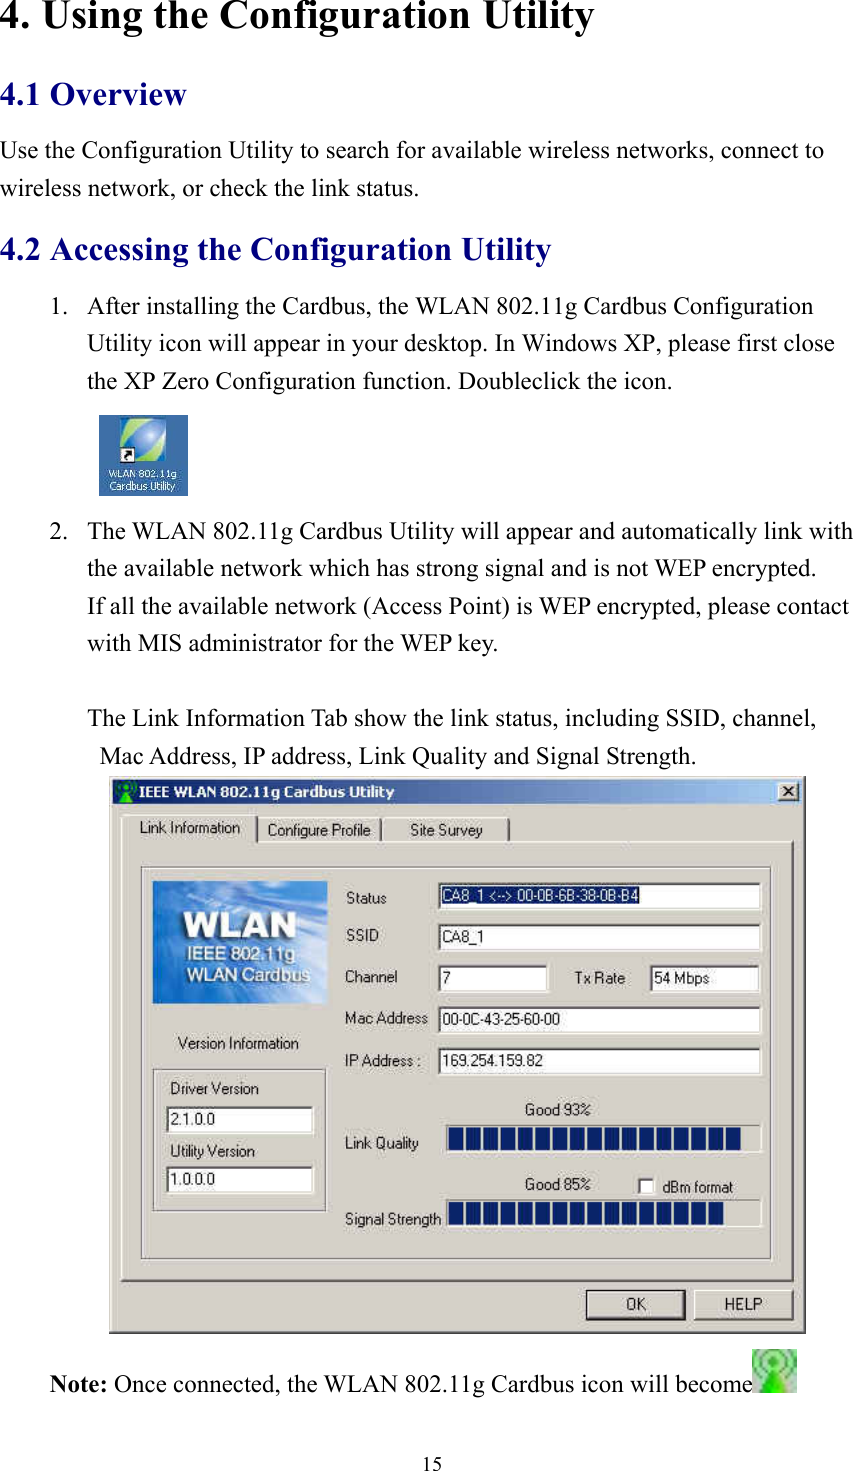  154. Using the Configuration Utility 4.1 Overview Use the Configuration Utility to search for available wireless networks, connect to wireless network, or check the link status. 4.2 Accessing the Configuration Utility 1.  After installing the Cardbus, the WLAN 802.11g Cardbus Configuration Utility icon will appear in your desktop. In Windows XP, please first close the XP Zero Configuration function. Doubleclick the icon.    2.  The WLAN 802.11g Cardbus Utility will appear and automatically link with the available network which has strong signal and is not WEP encrypted.   If all the available network (Access Point) is WEP encrypted, please contact with MIS administrator for the WEP key.                The Link Information Tab show the link status, including SSID, channel, Mac Address, IP address, Link Quality and Signal Strength.  Note: Once connected, the WLAN 802.11g Cardbus icon will become  